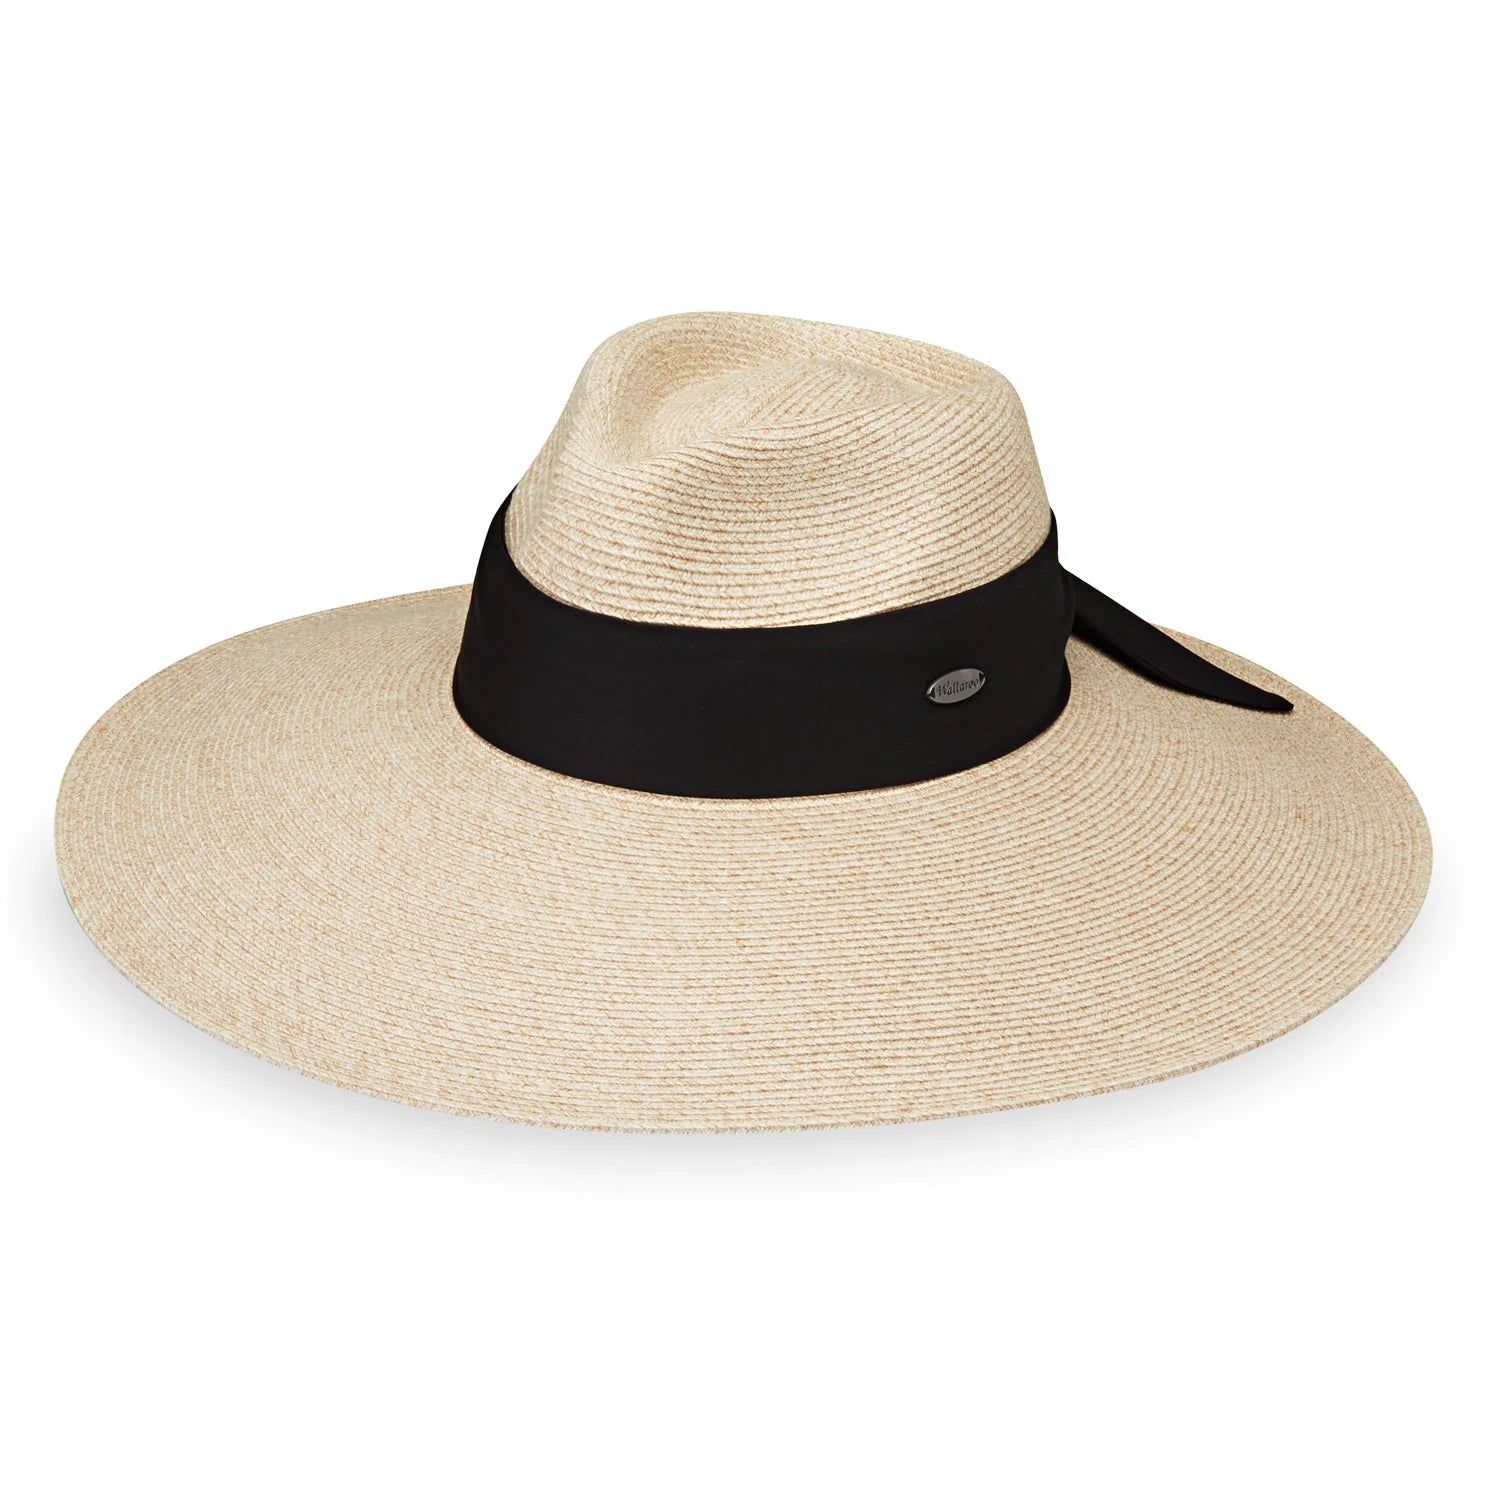 Inspired by the timeless romance movie, “Somewhere in Time,” starring Jane Seymour, this impressive hat has a sweeping brim for enchanting walks by the sea. Sun protection at its finest.